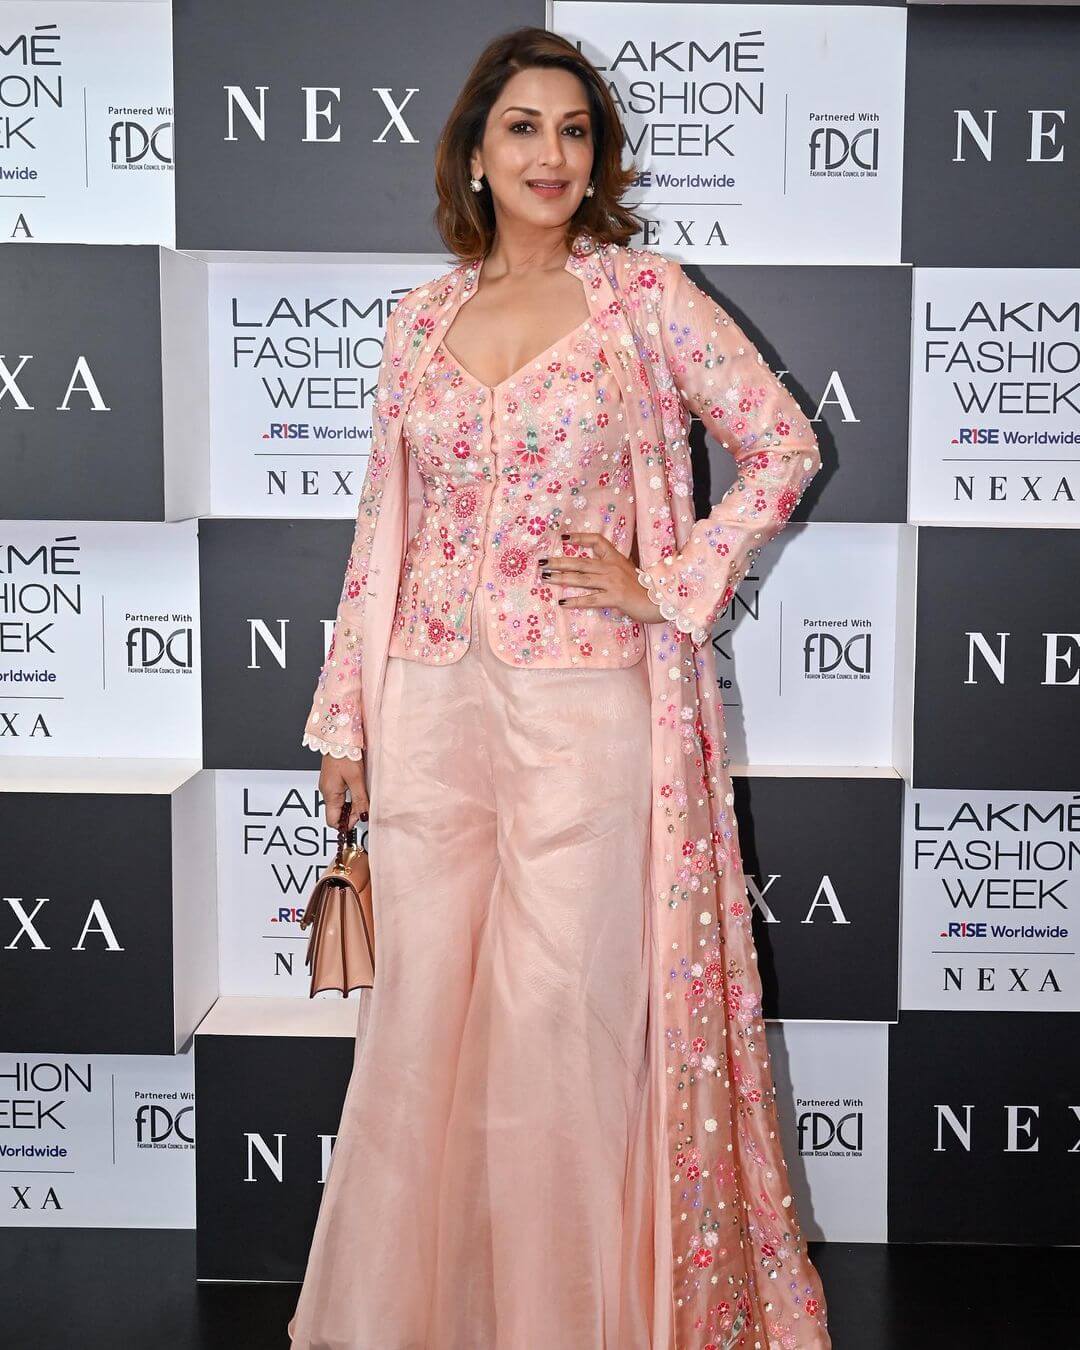 Lakme Fashion Week Bollywood Celebrities Spotted At The Runway - Sonali Bendre's Glossy Look In Beautiful Baby Pink Dress